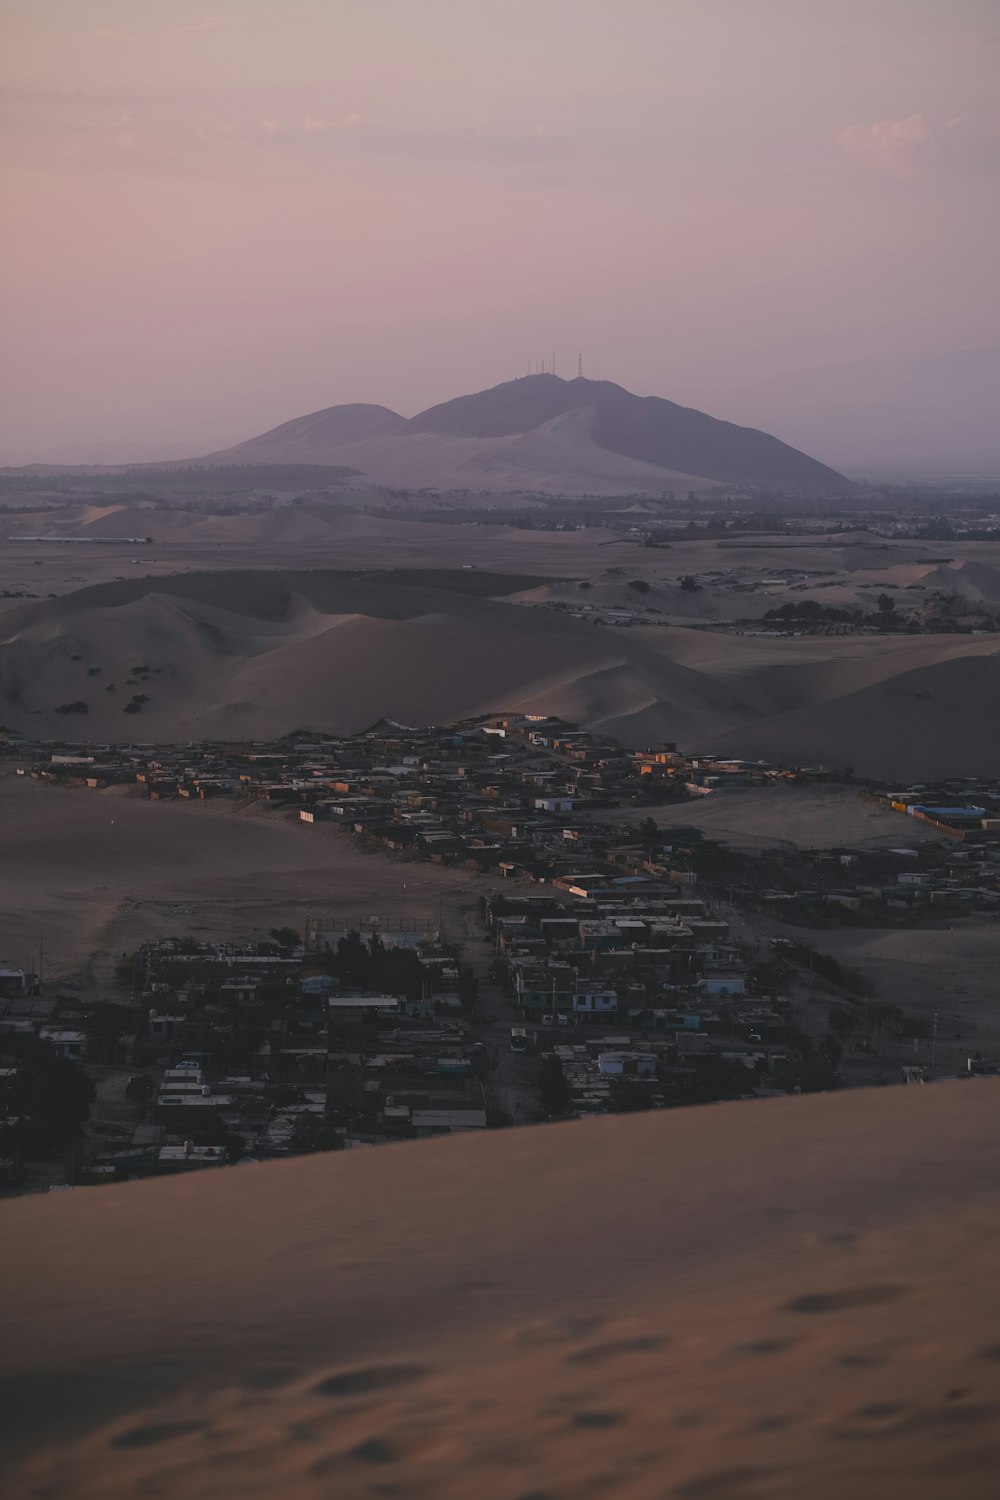 a view of a town in the middle of a desert